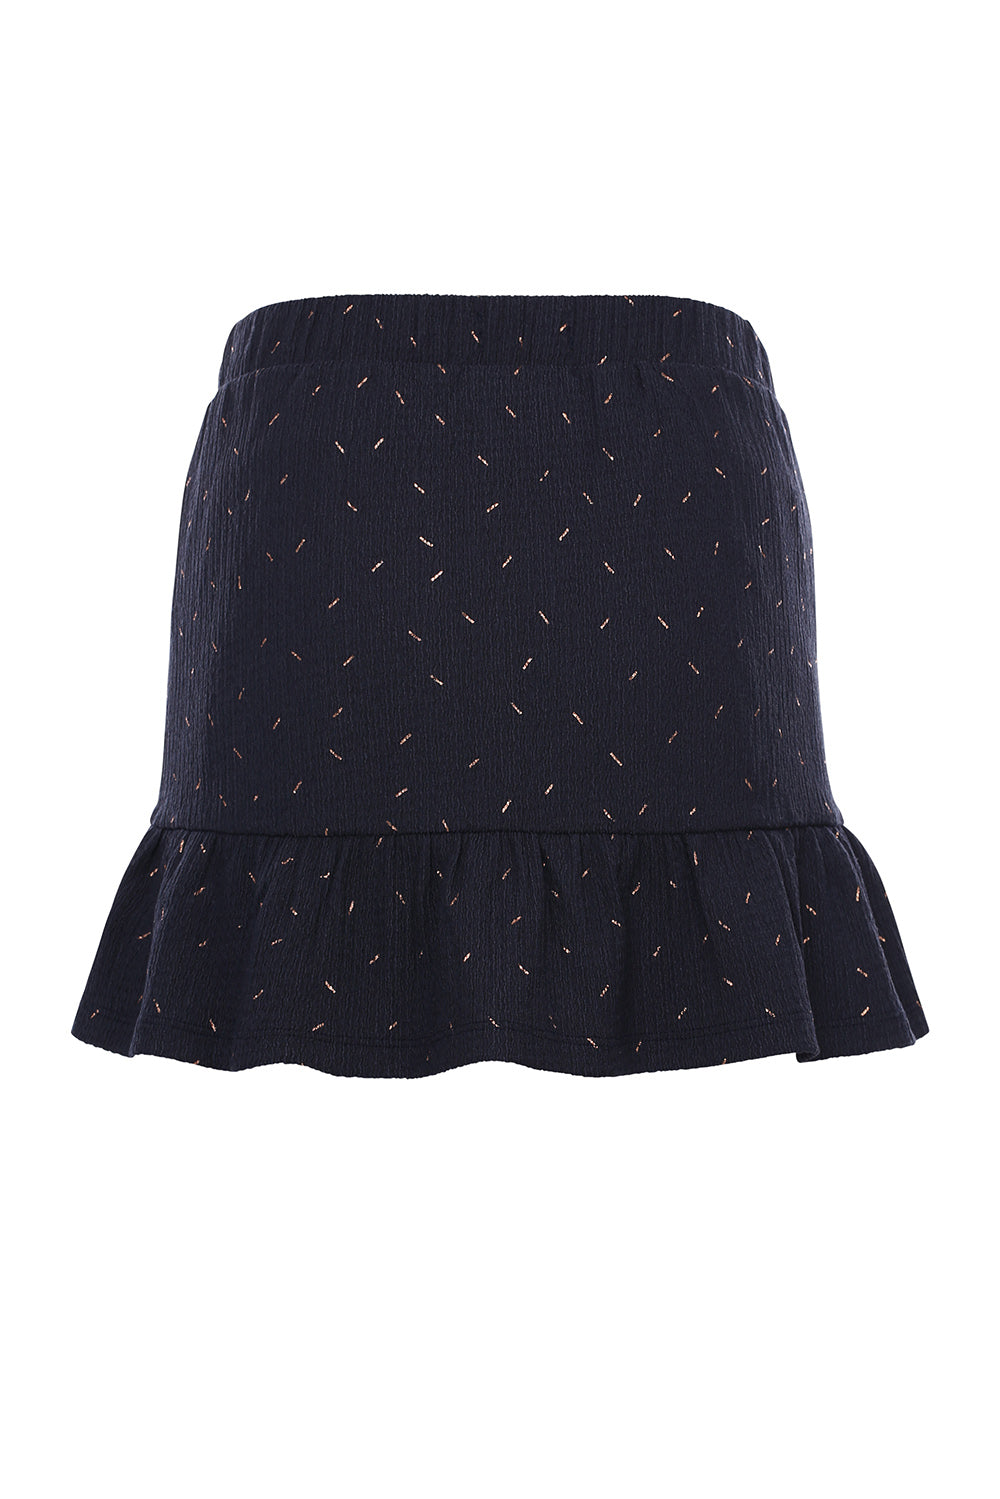 Looxs 10sixteen Crinkle Skirt With Foil